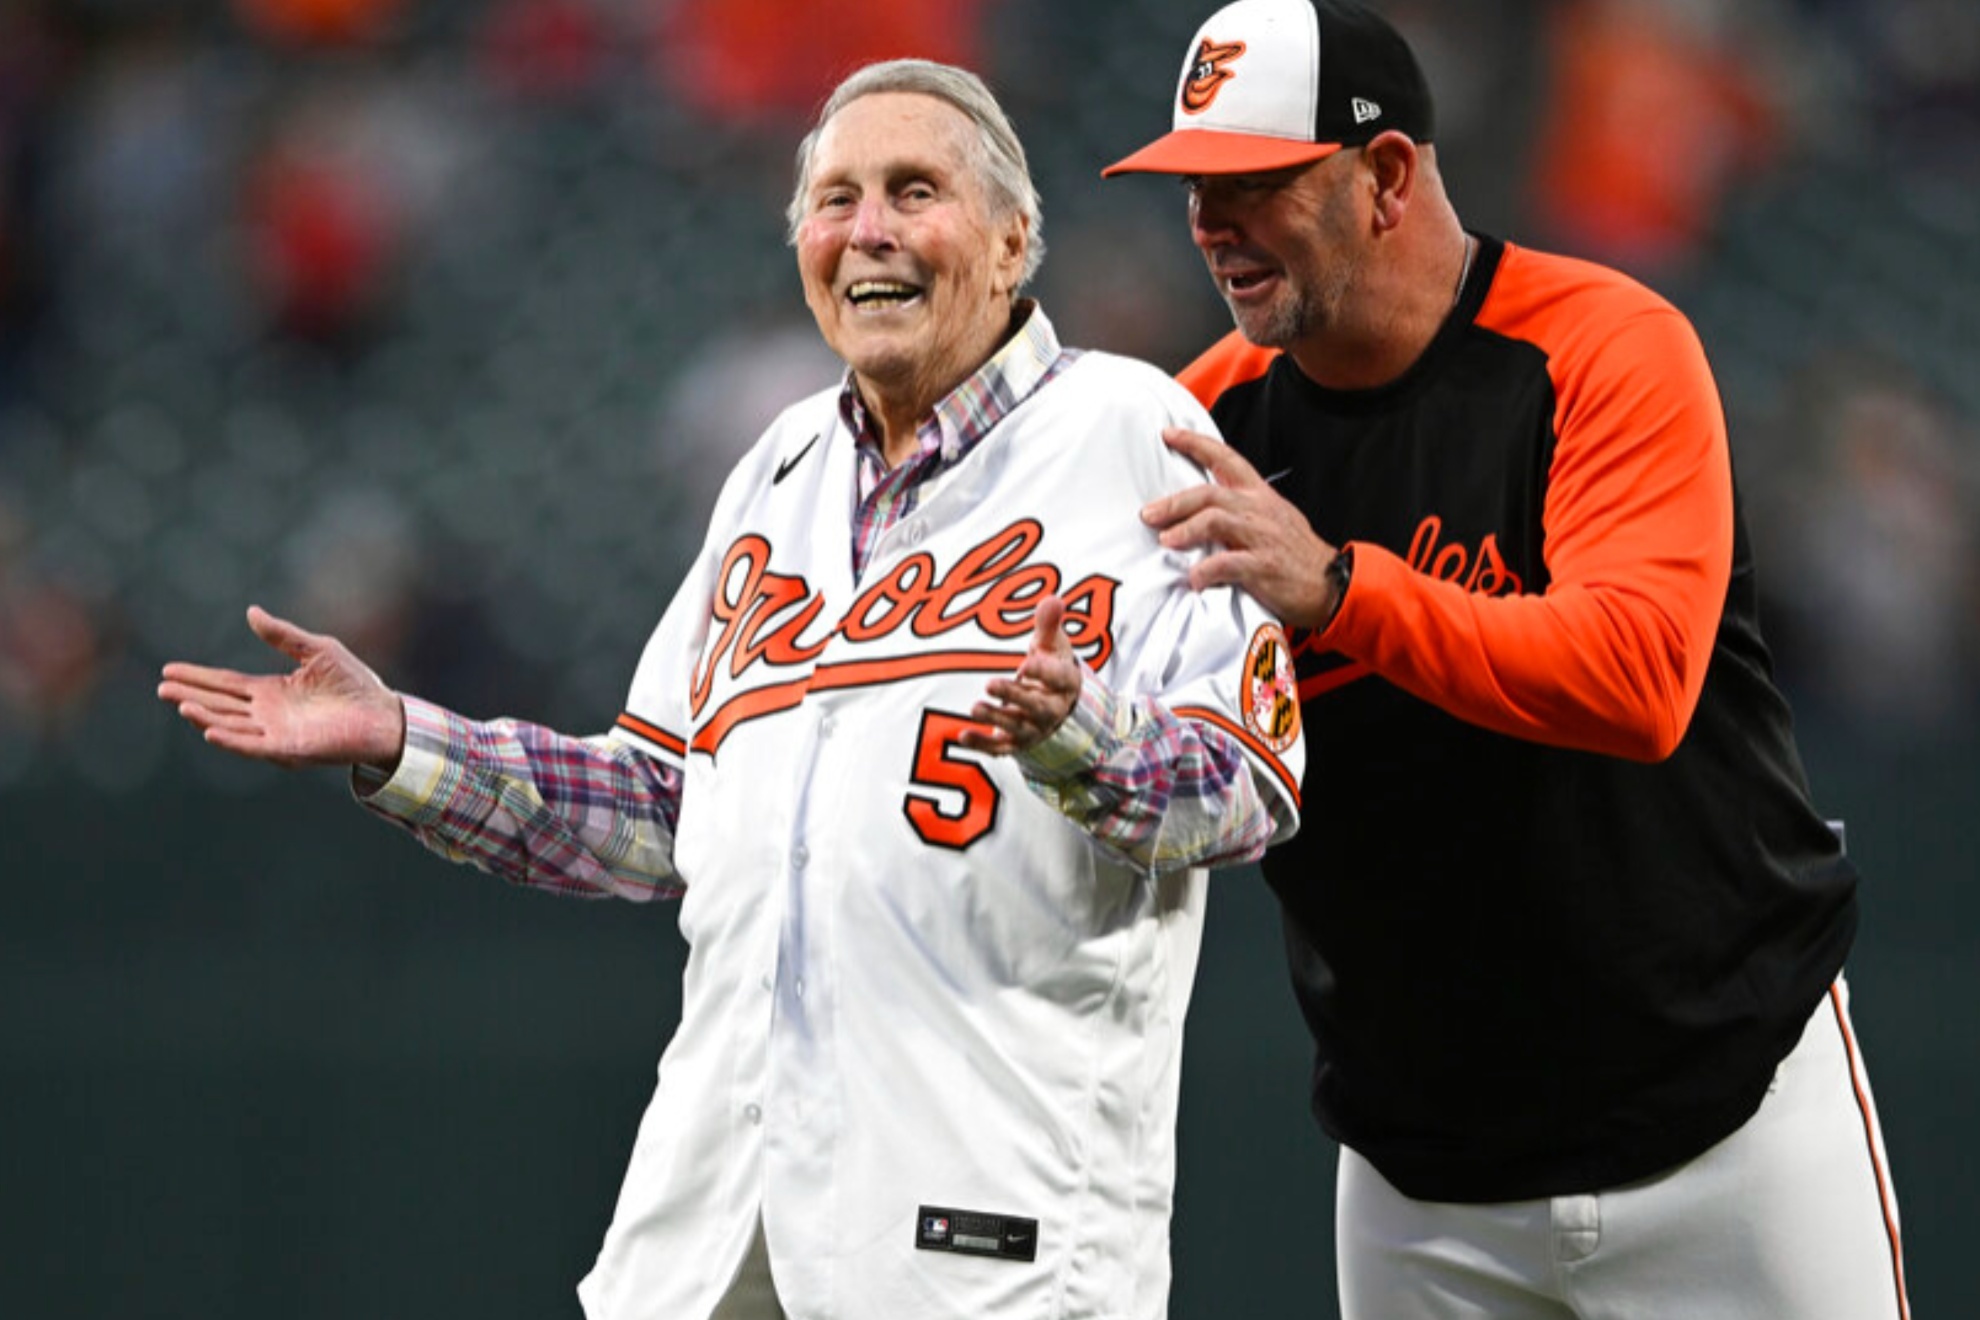 The Baltimore Orioles announced that Mr. Oriole, Brooks Robinson, passed away on Tuesday